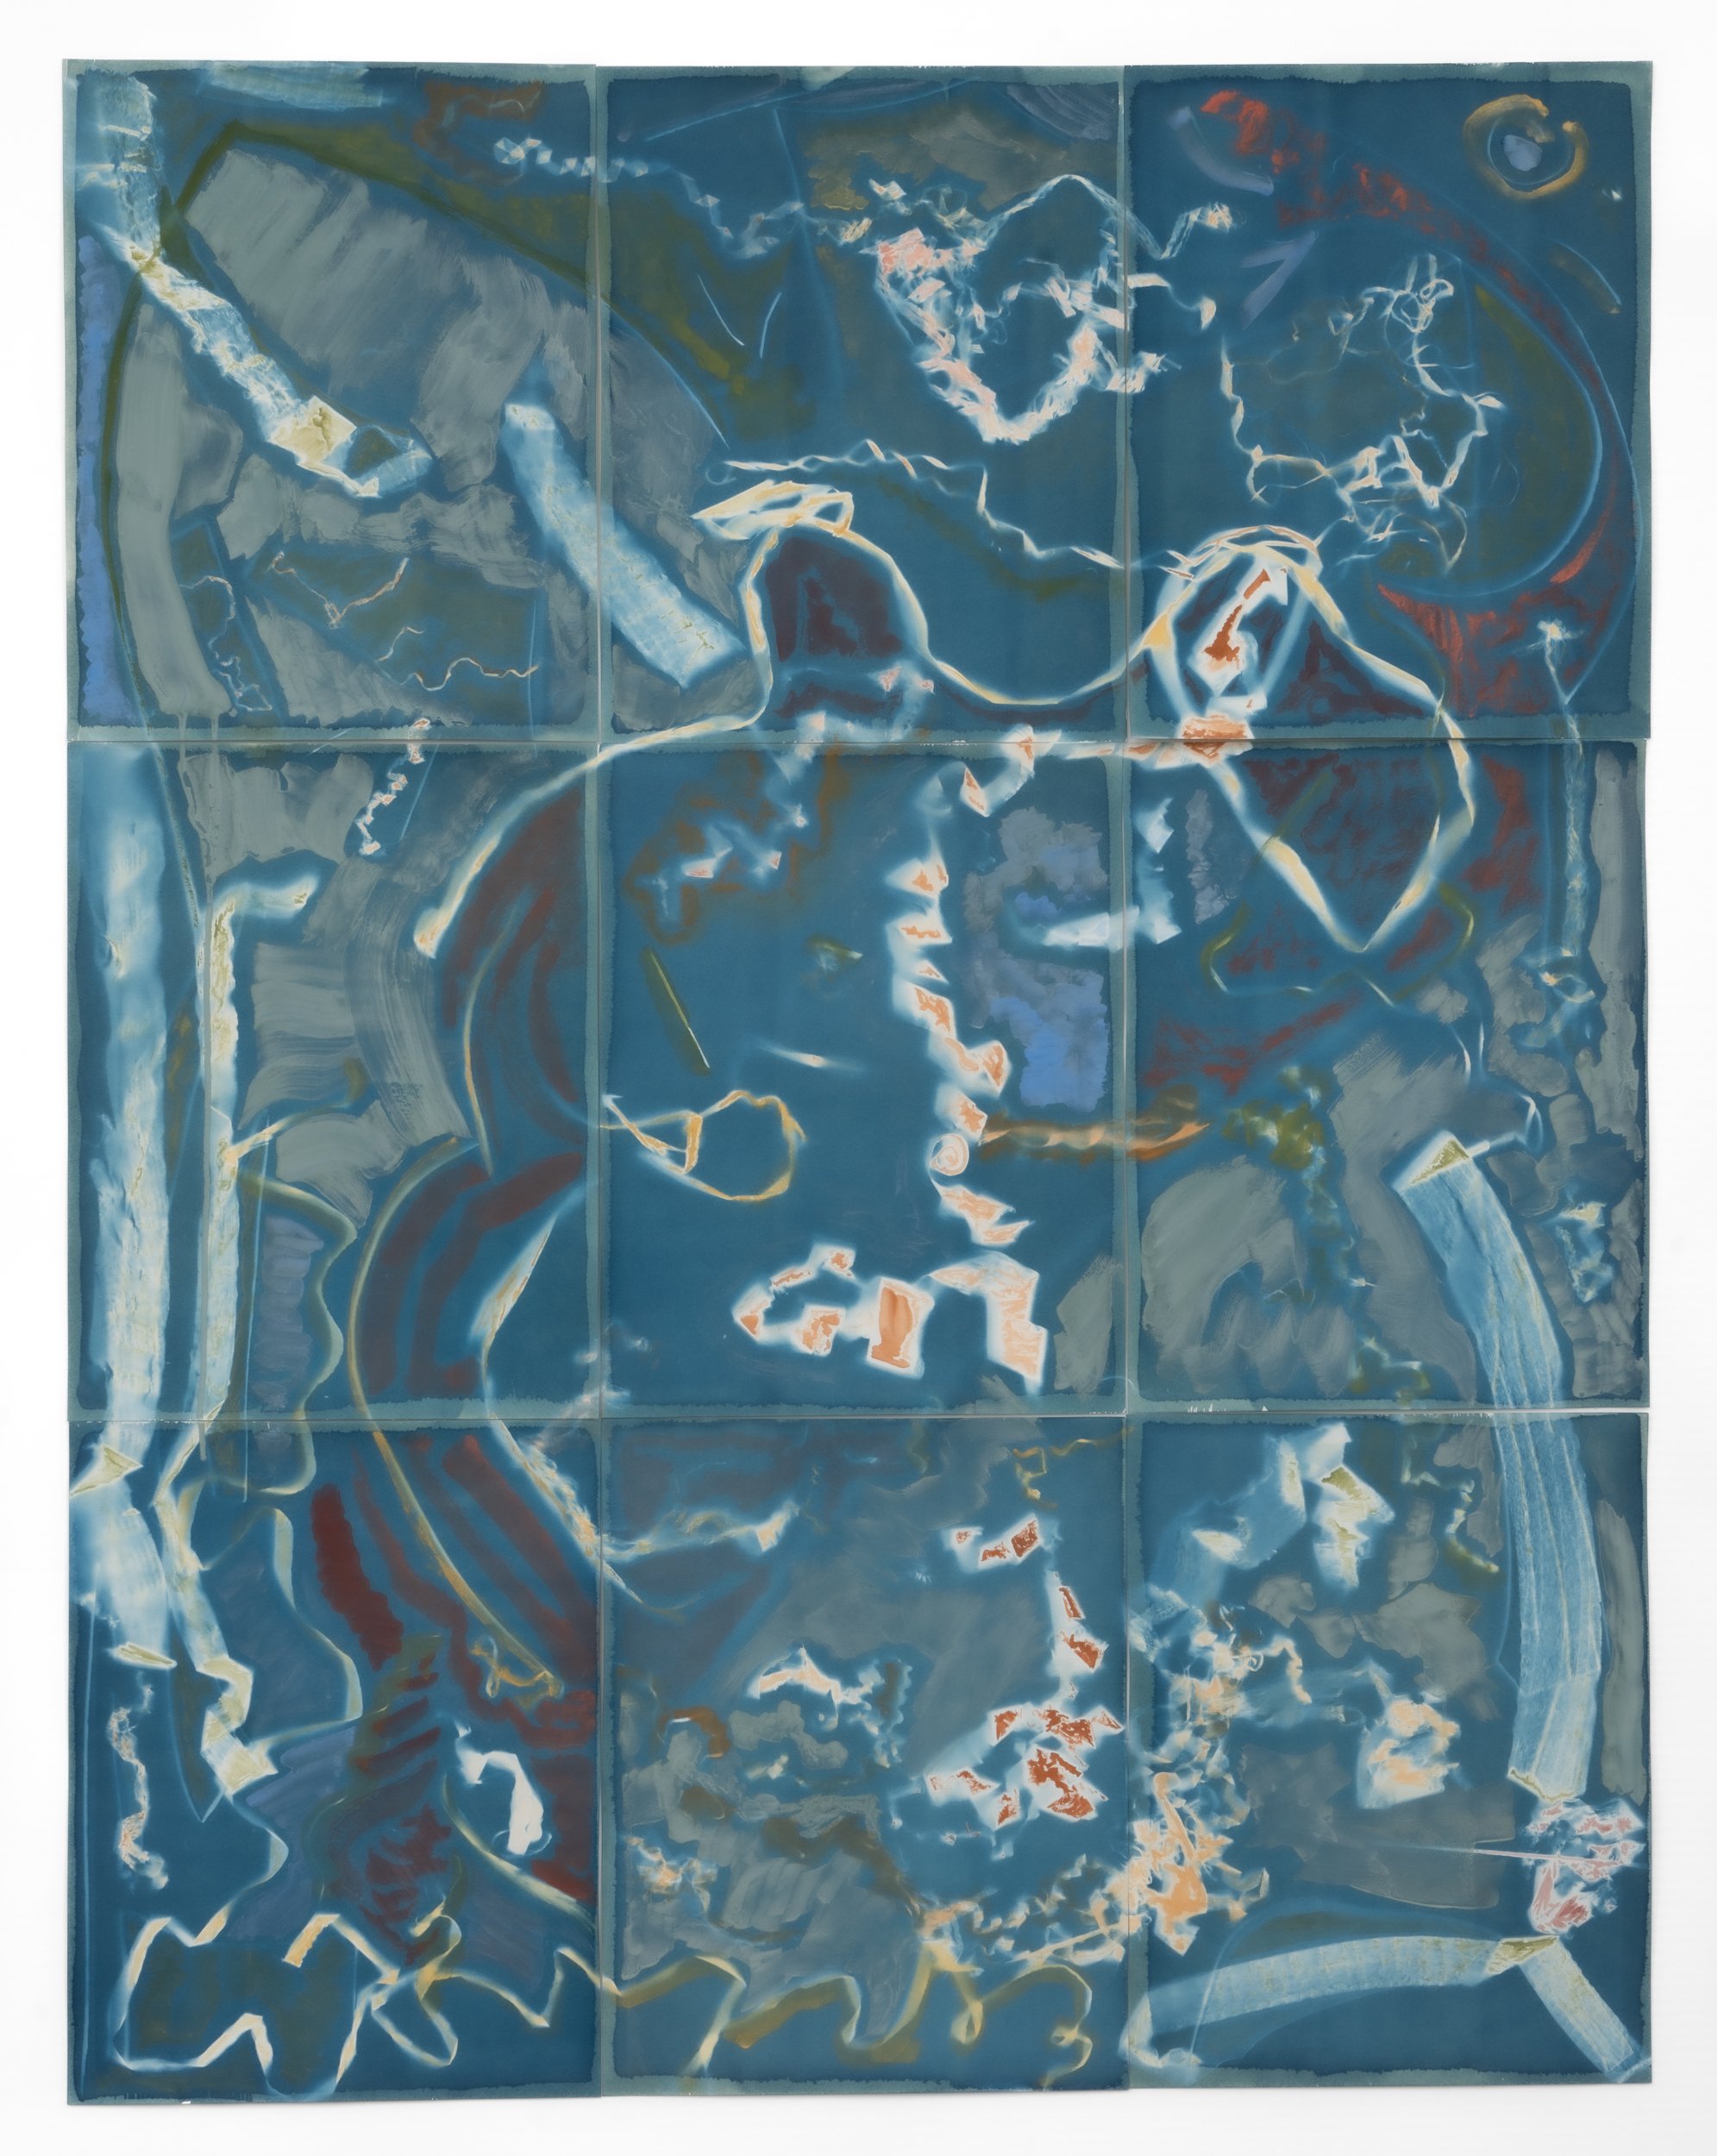   spotting  (exposed 8.26.2023)  cyanotype and earth pigments on paper 42 x 32 3/4”  2023  